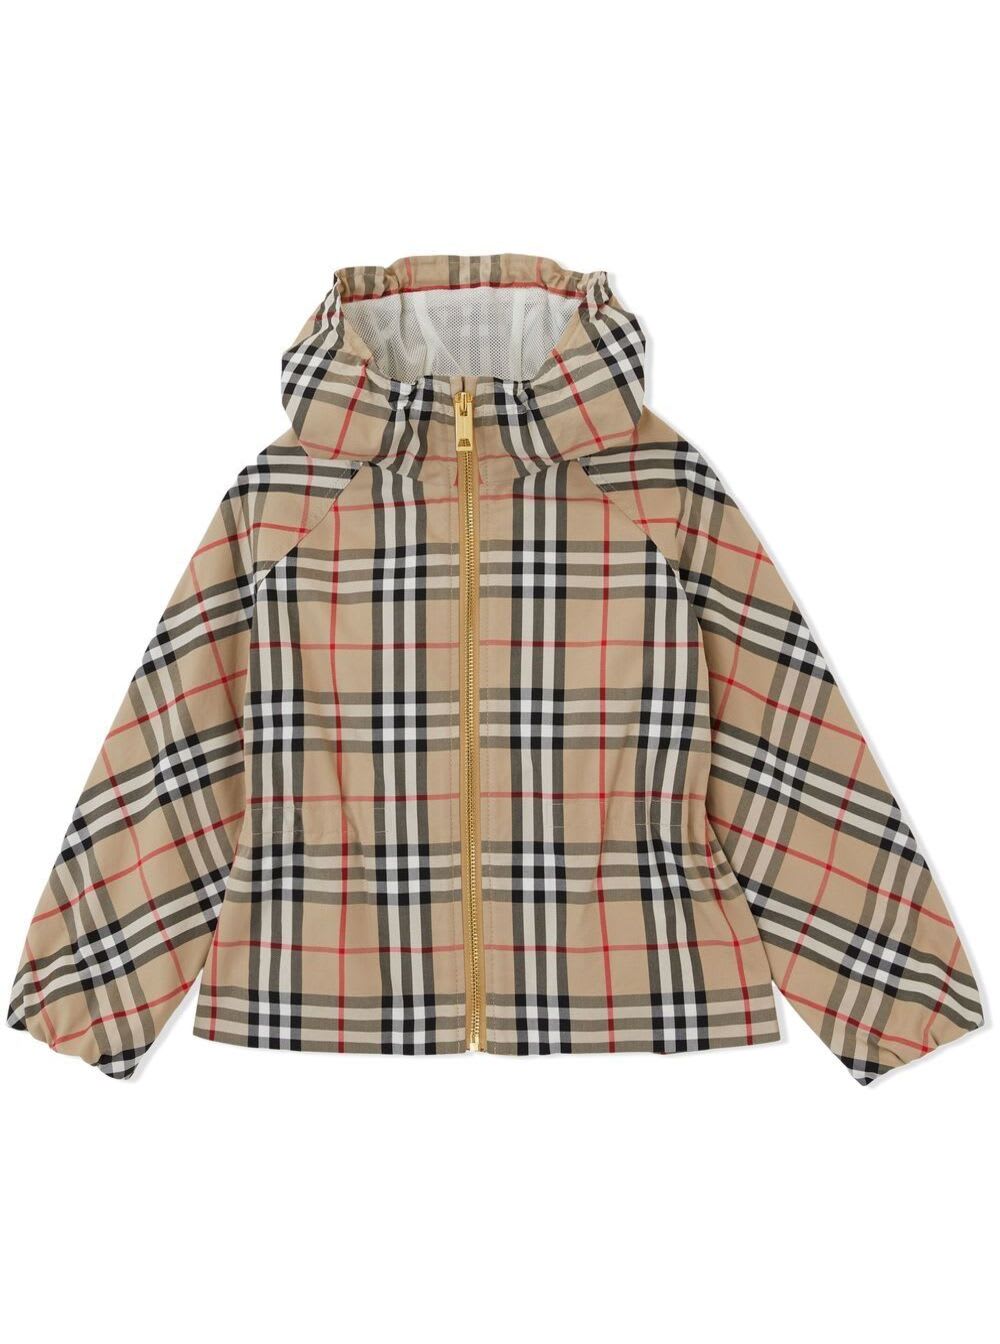 BURBERRY BEIGE HOODED JACKET WITH VINTAGE CHECK MOTIF IN COTTON KIDS